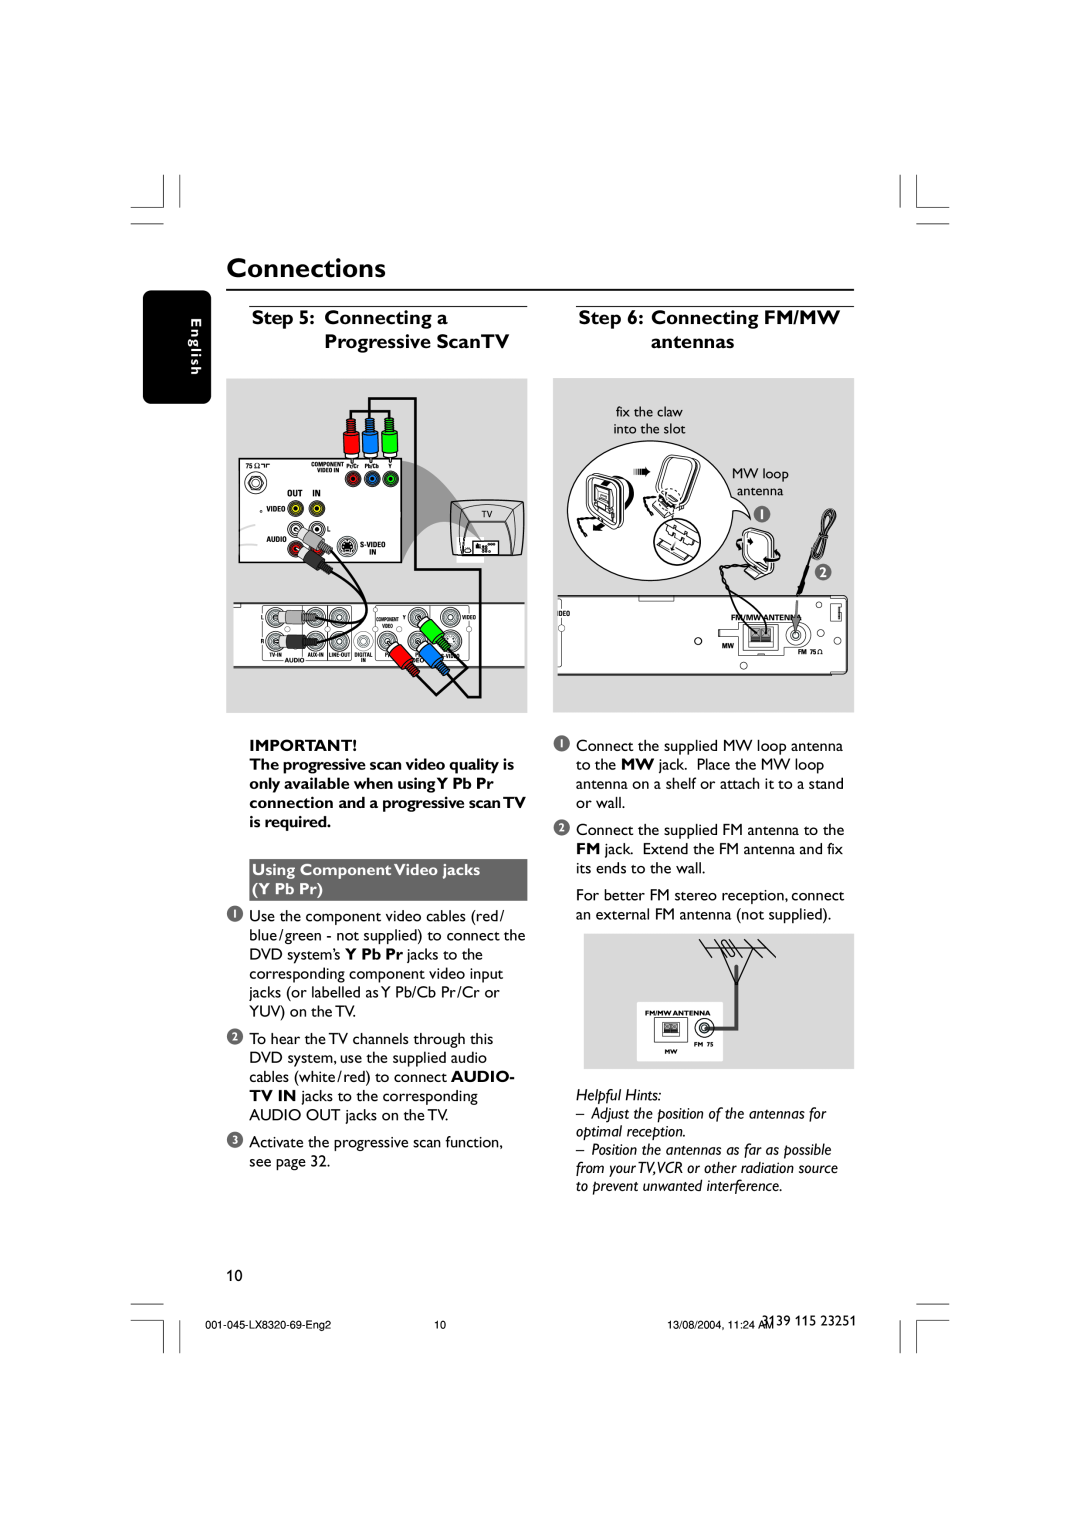 Philips LX8320 user manual Connecting FM/MW antennas, Connecting a Progressive ScanTV, Connections, Helpful Hints, English 